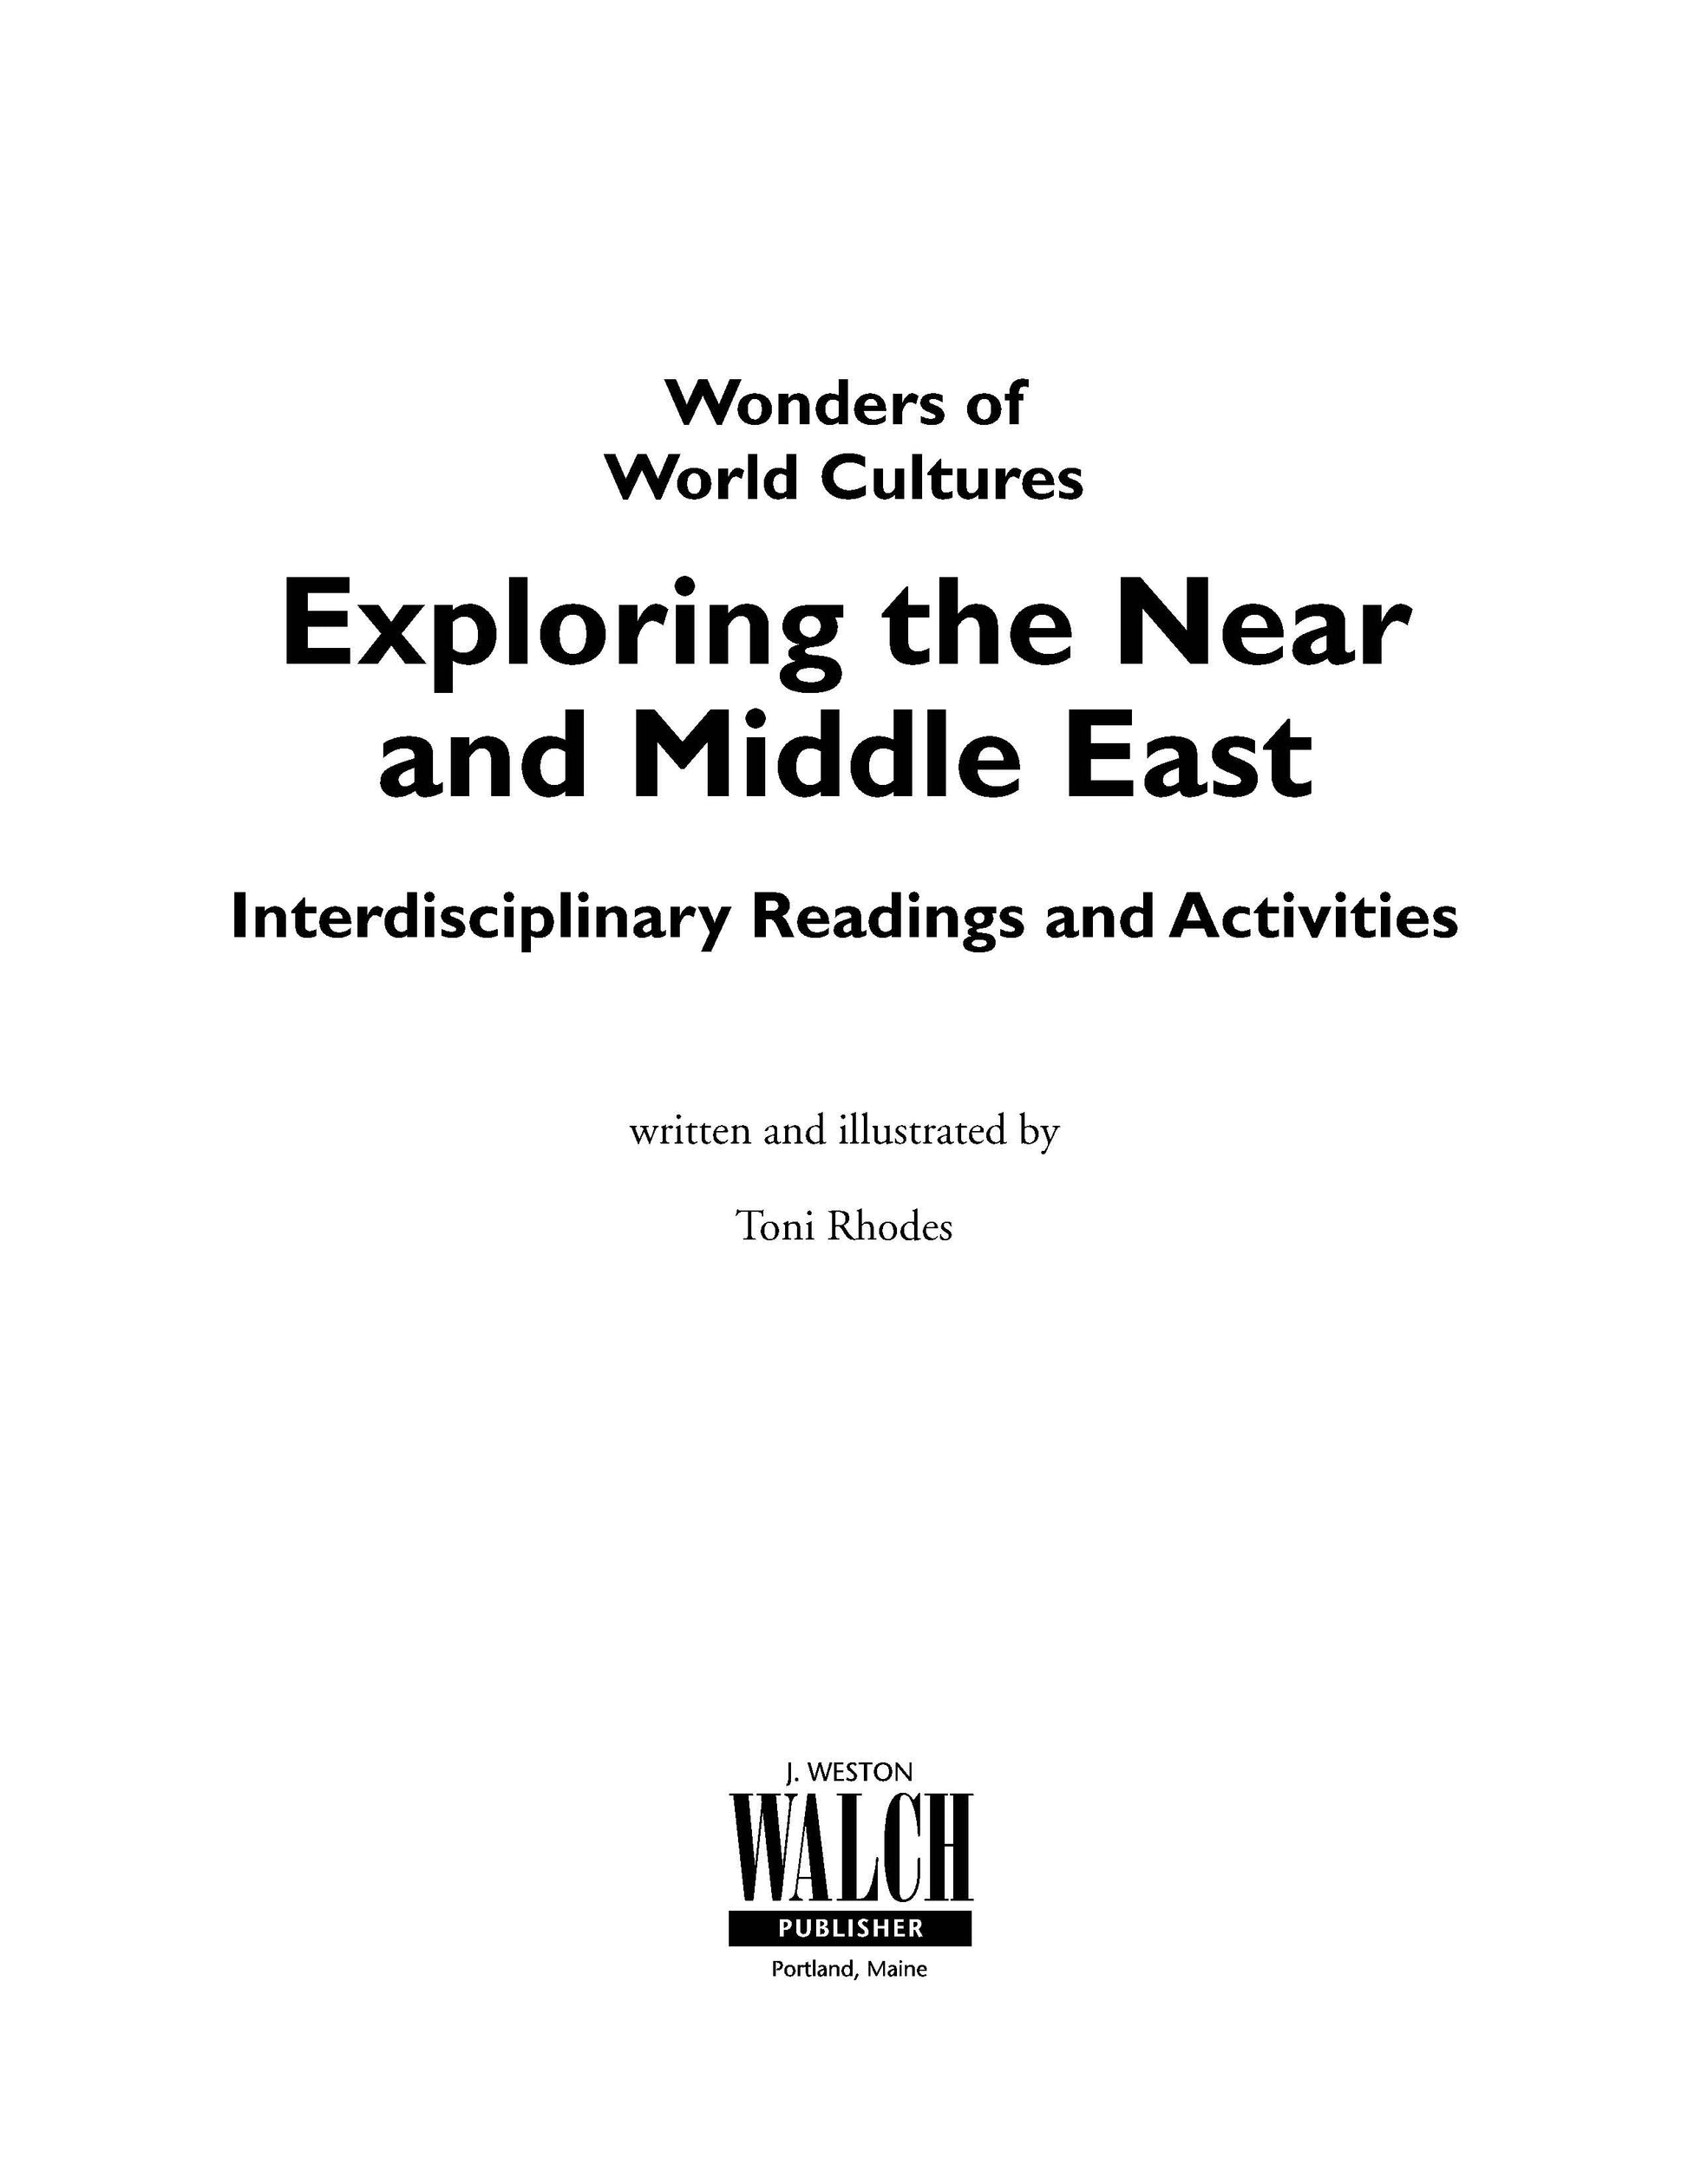 Bright Education Australia, Teacher Resources, Book, History, Wonders of World Cultures: Exploring Near & Middle East